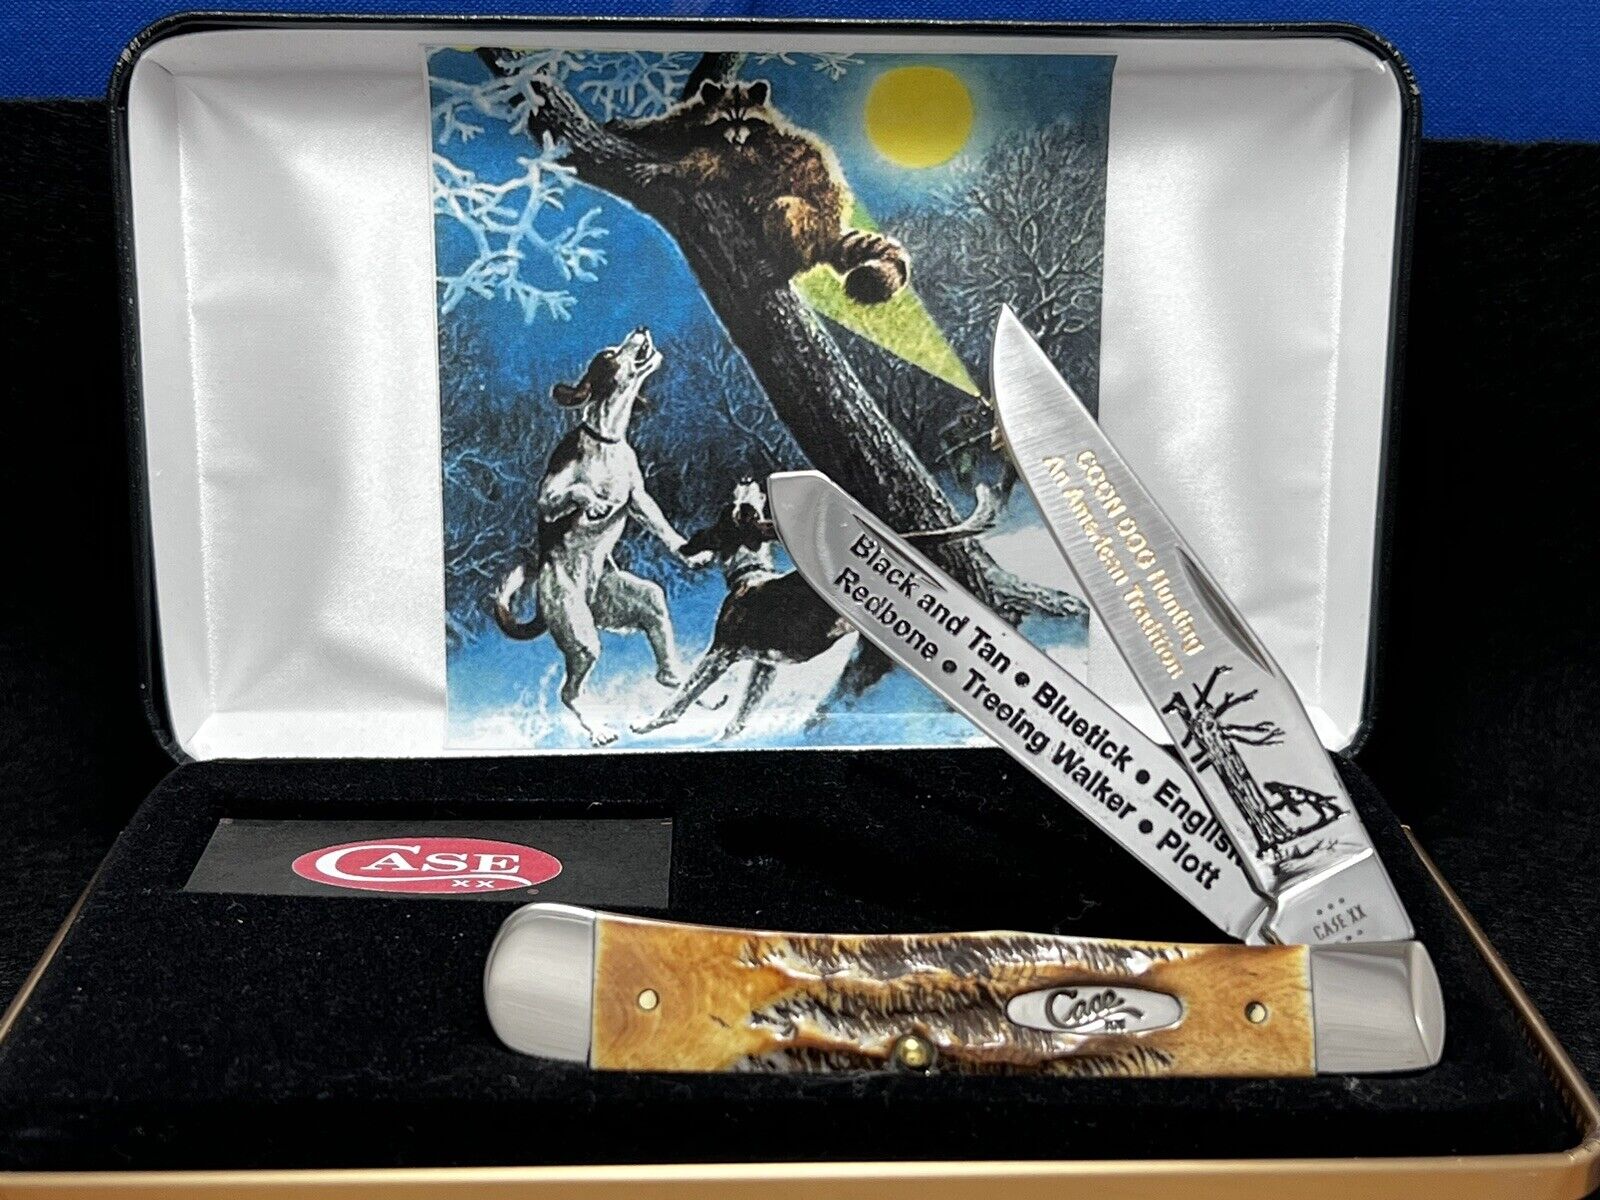 Case XX USA #002 boneStag Coon Dog Hunting American Tradition Trapper Knife NEW.